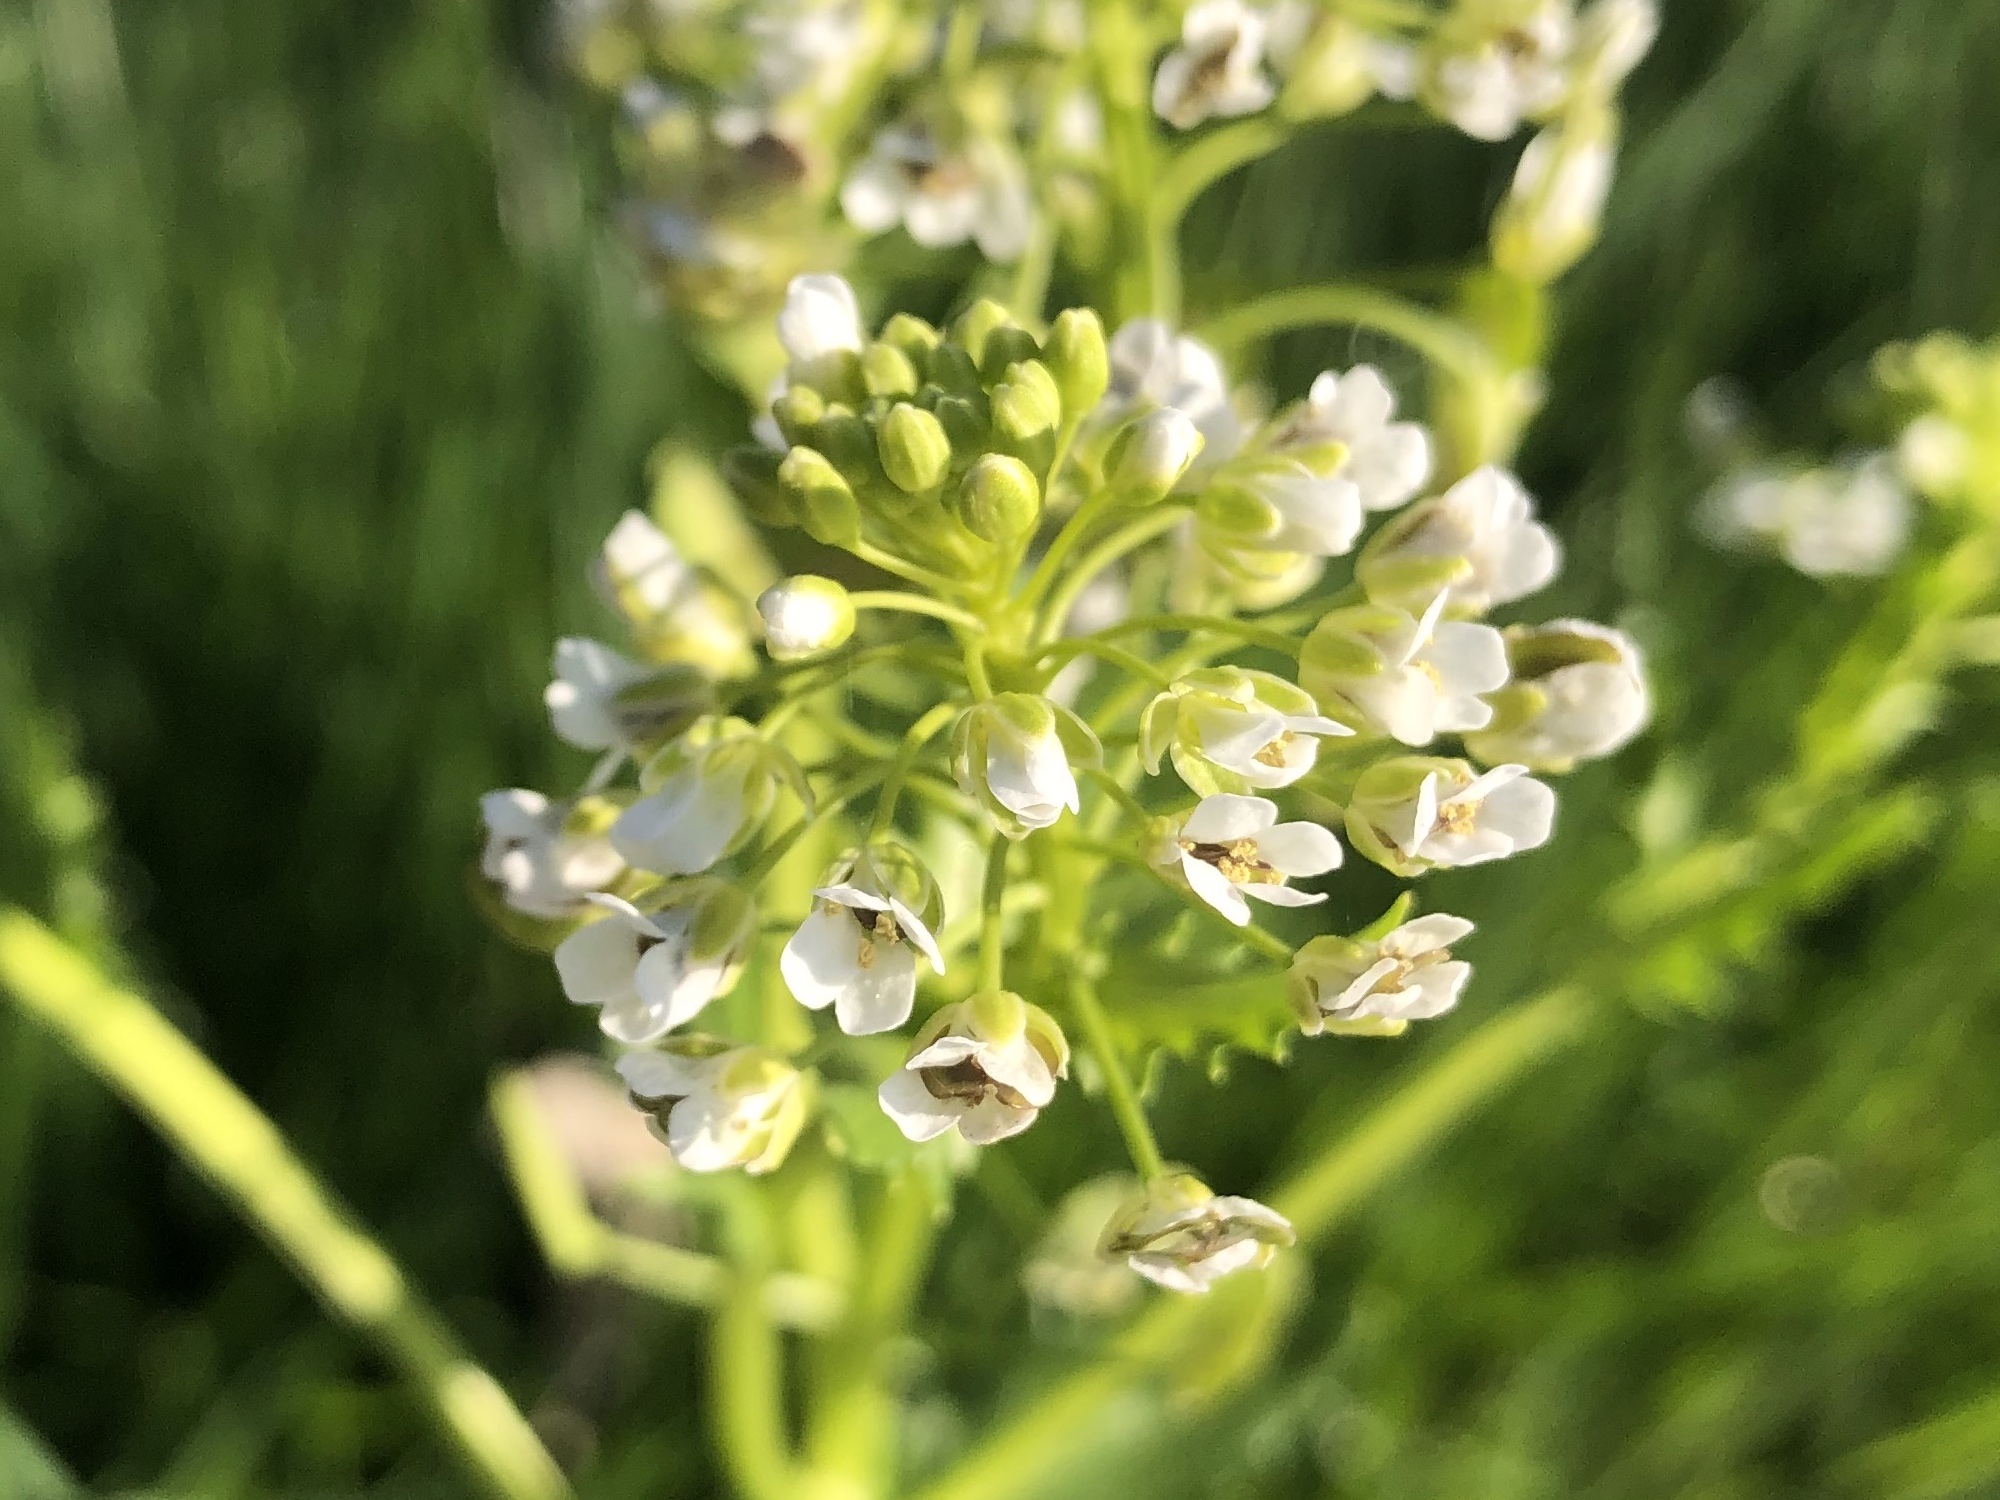 Field Pennycress next to sidewalk on Monroe Street in Madison, Wisconsin on May 8, 2021.